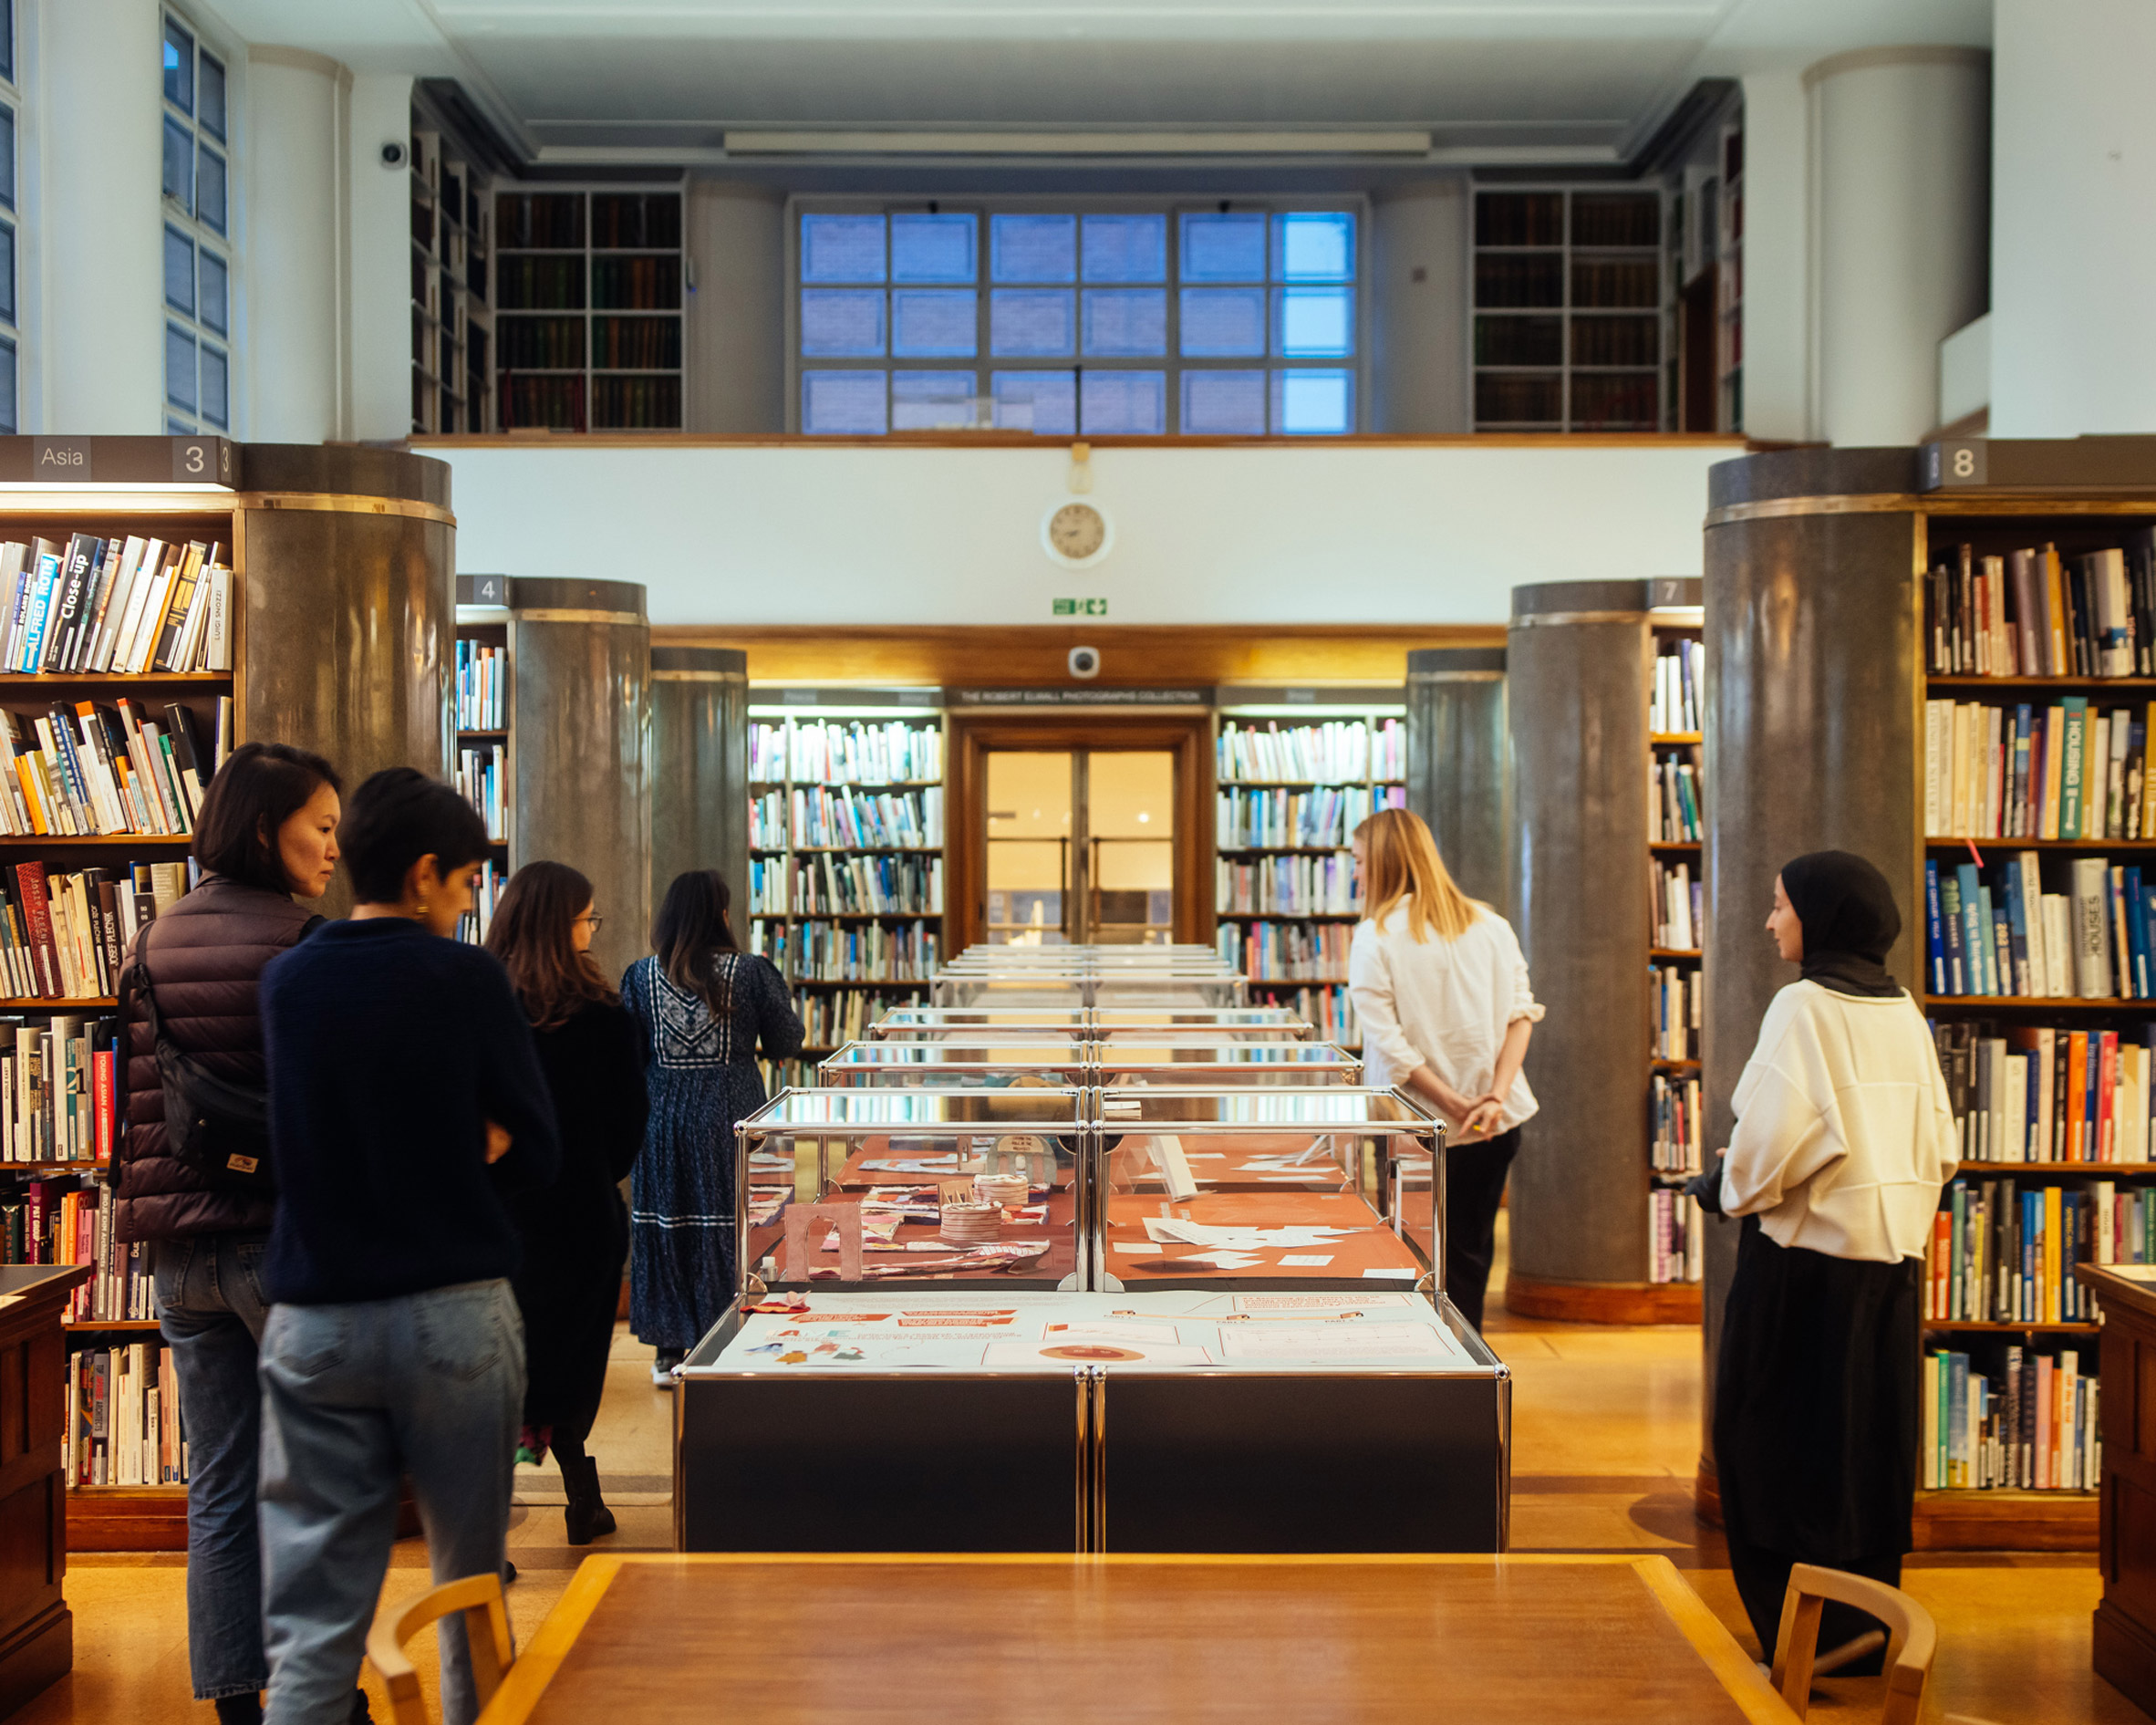 Exhibition on diversity in architecture at the RIBA